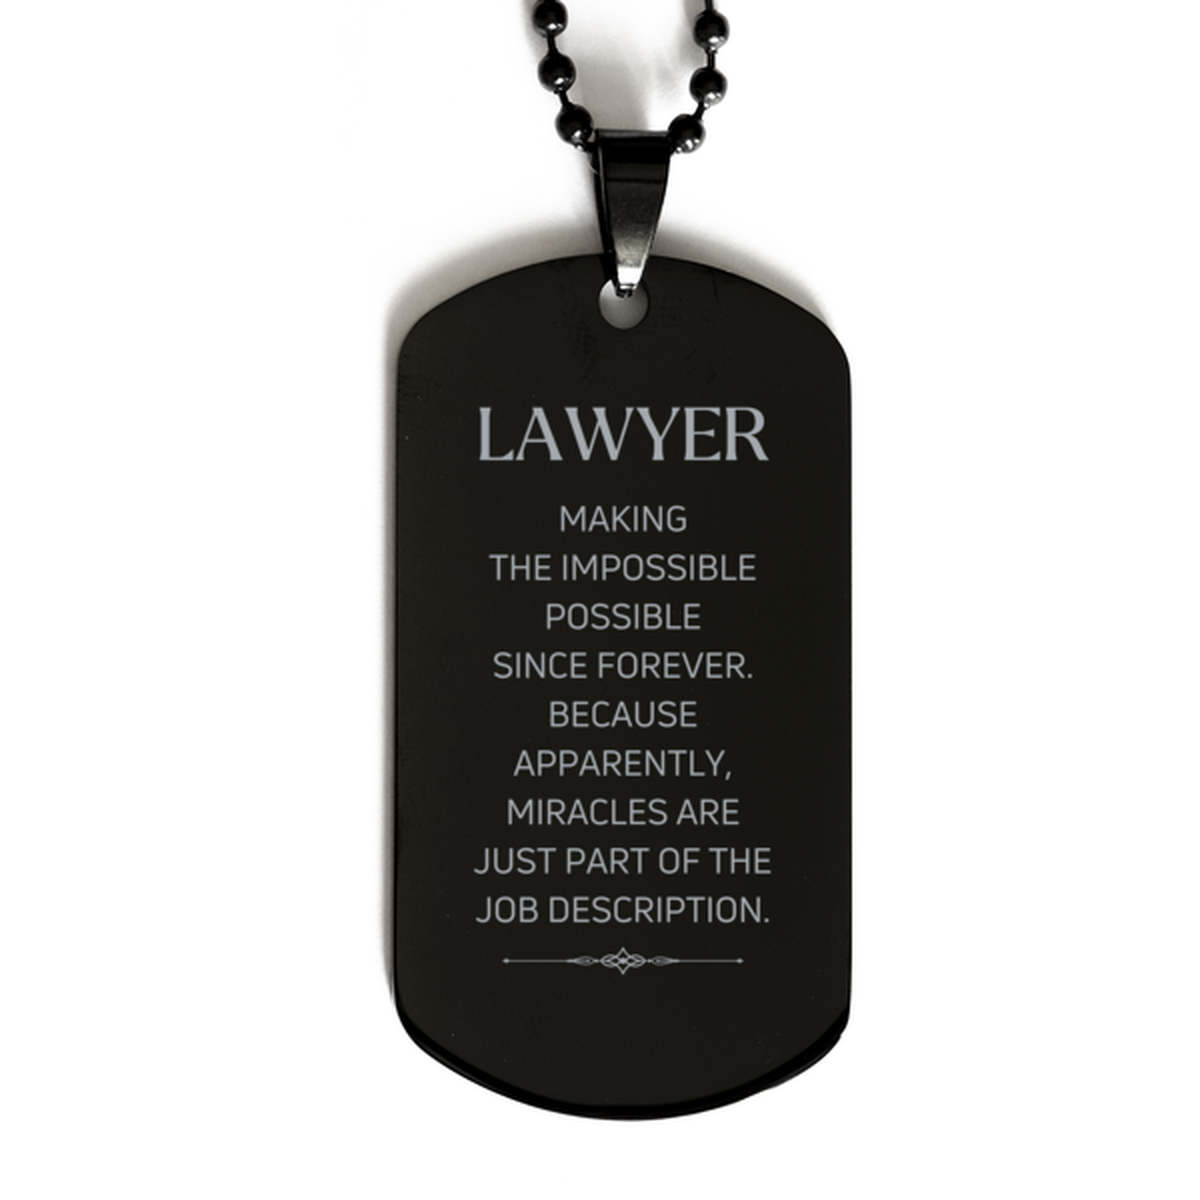 Funny Lawyer Gifts, Miracles are just part of the job description, Inspirational Birthday Black Dog Tag For Lawyer, Men, Women, Coworkers, Friends, Boss